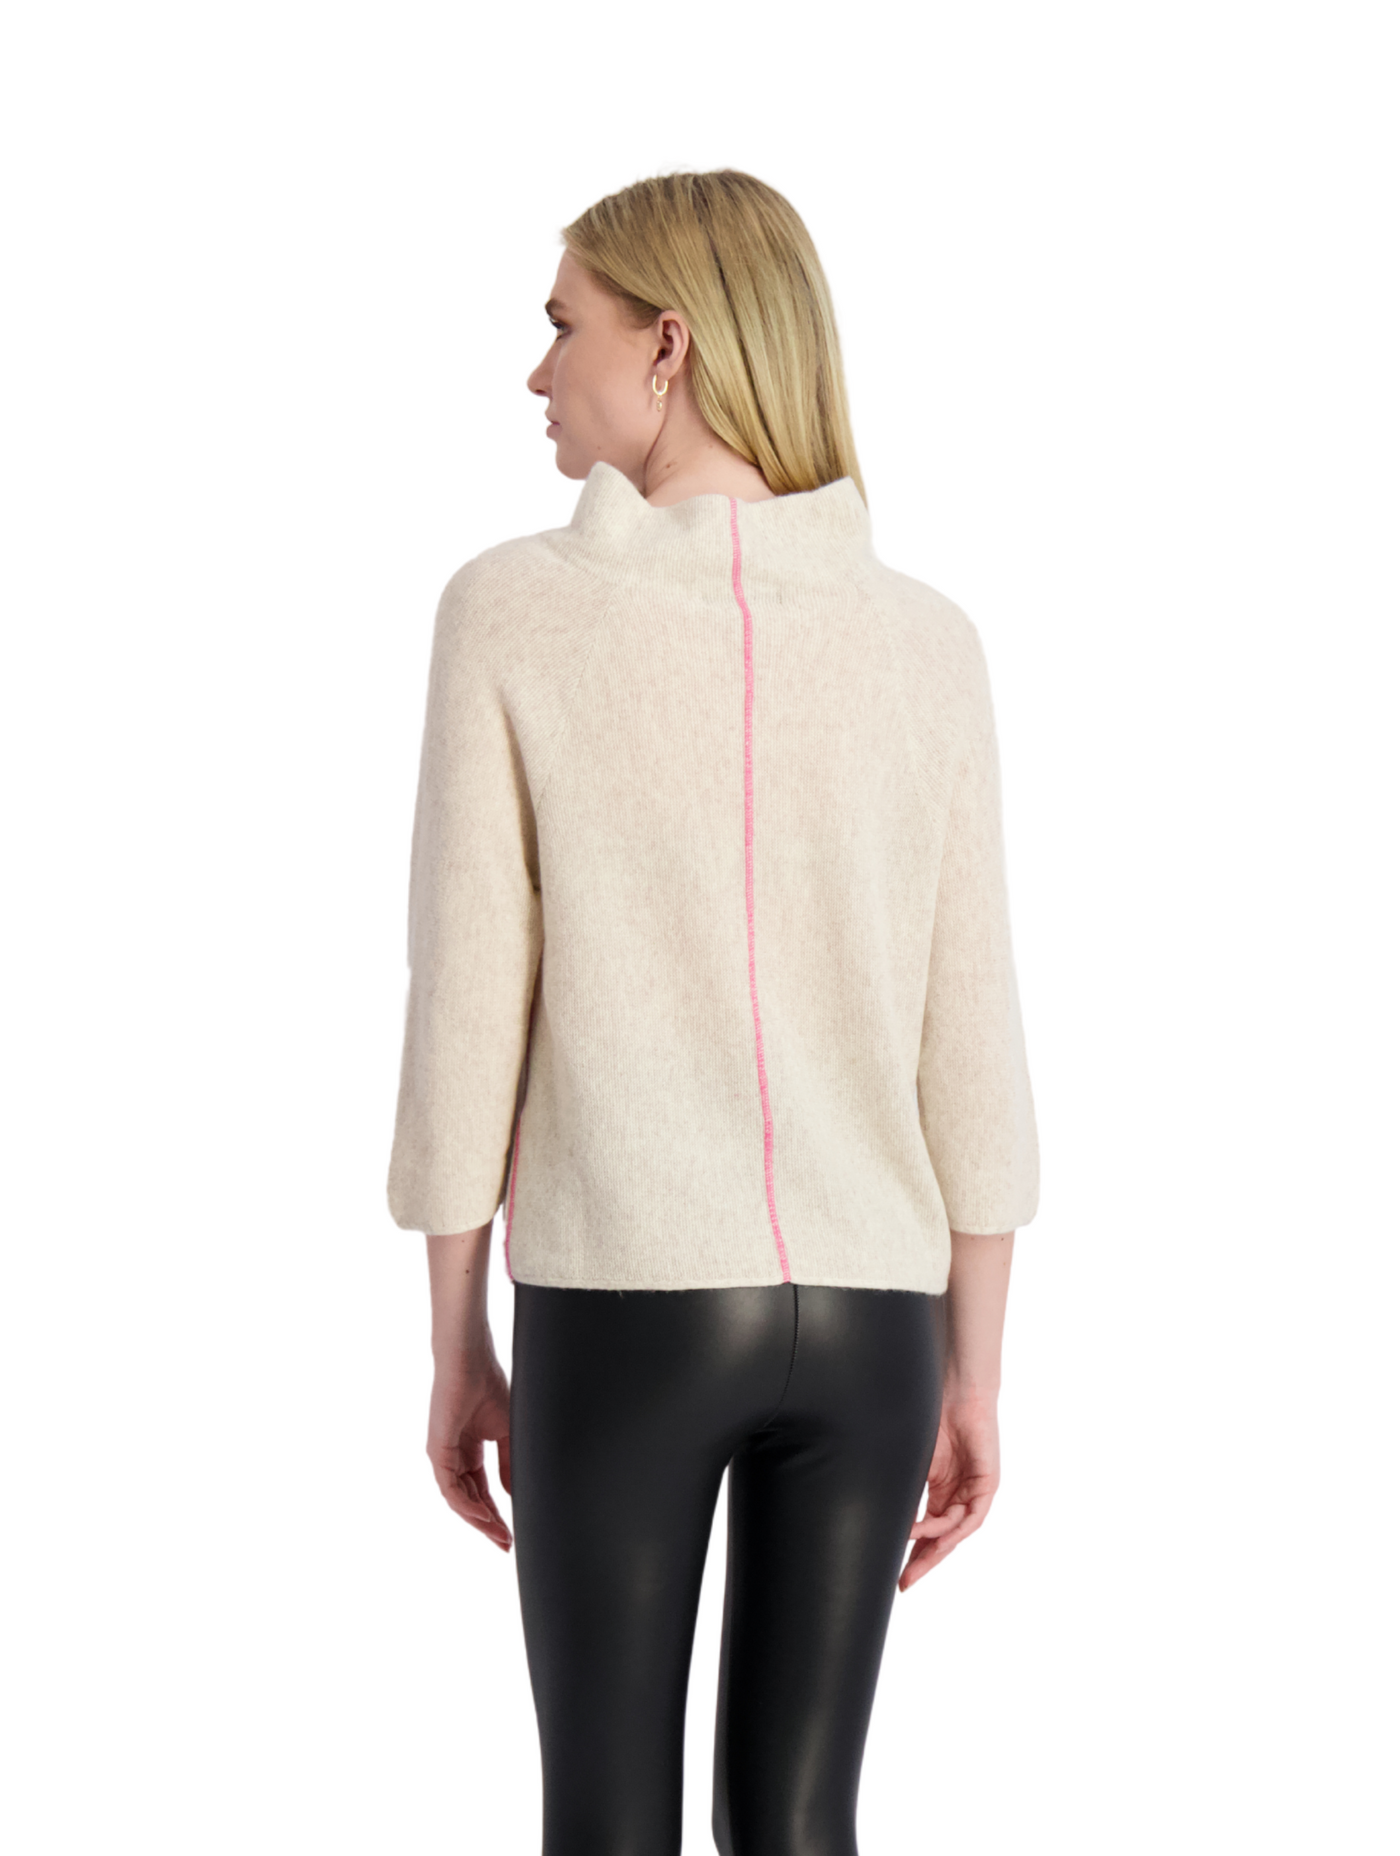 SALE & OFFERS - PENELOPE - Maternity & Nursing Sweater in Cashmere Blend  with Rounded Hem | Attesa Maternity